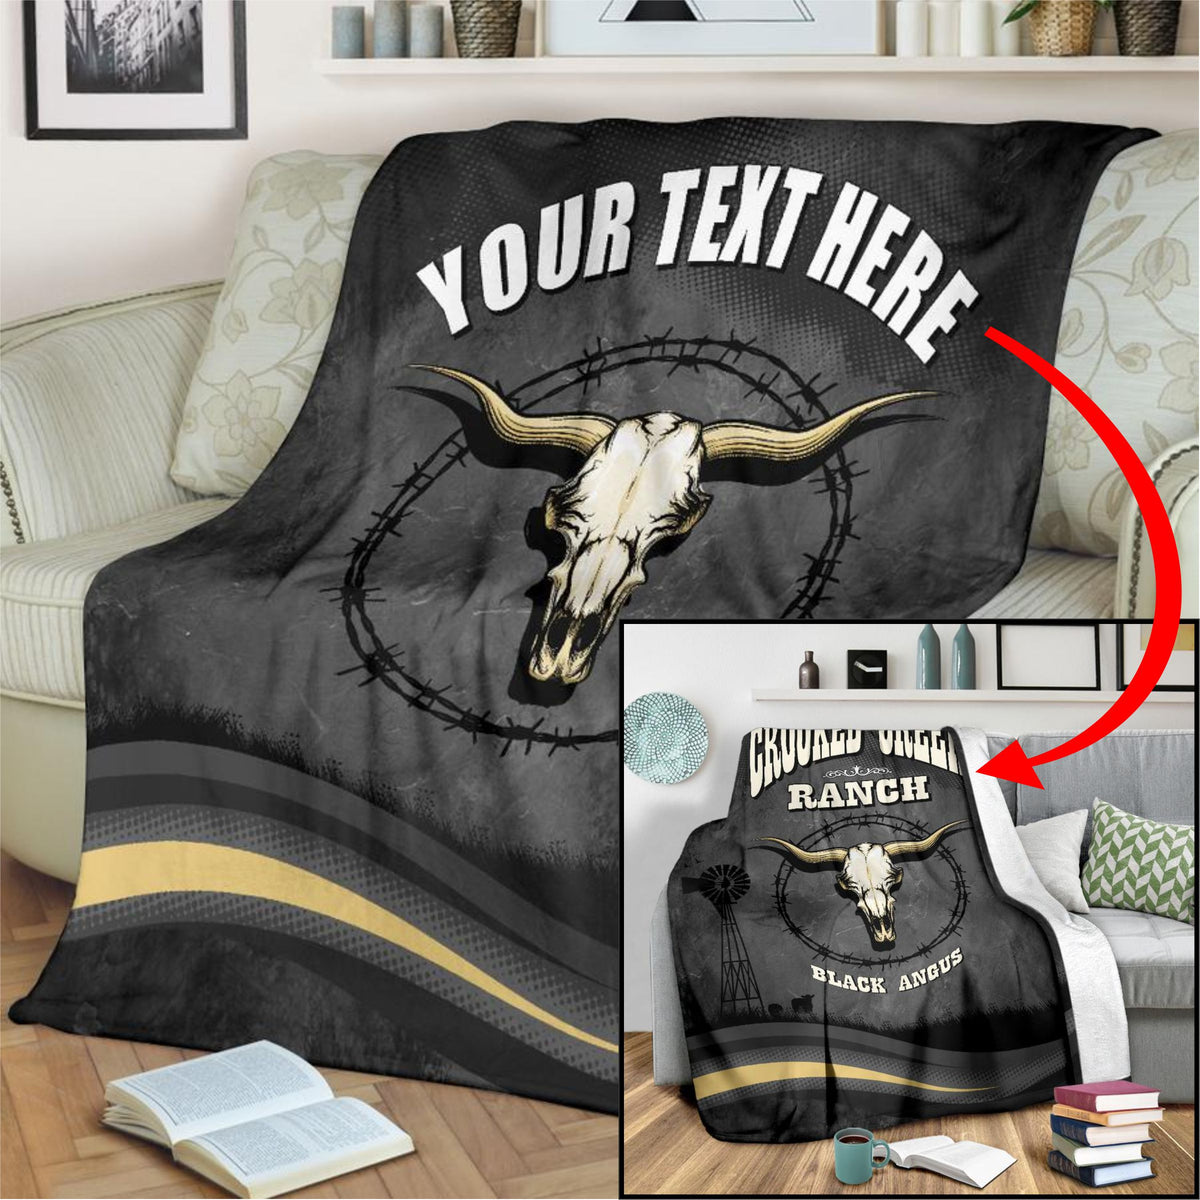 Bull Skull Barb Wire Your Text Here Micro Fleece Blanket  Free Shipping